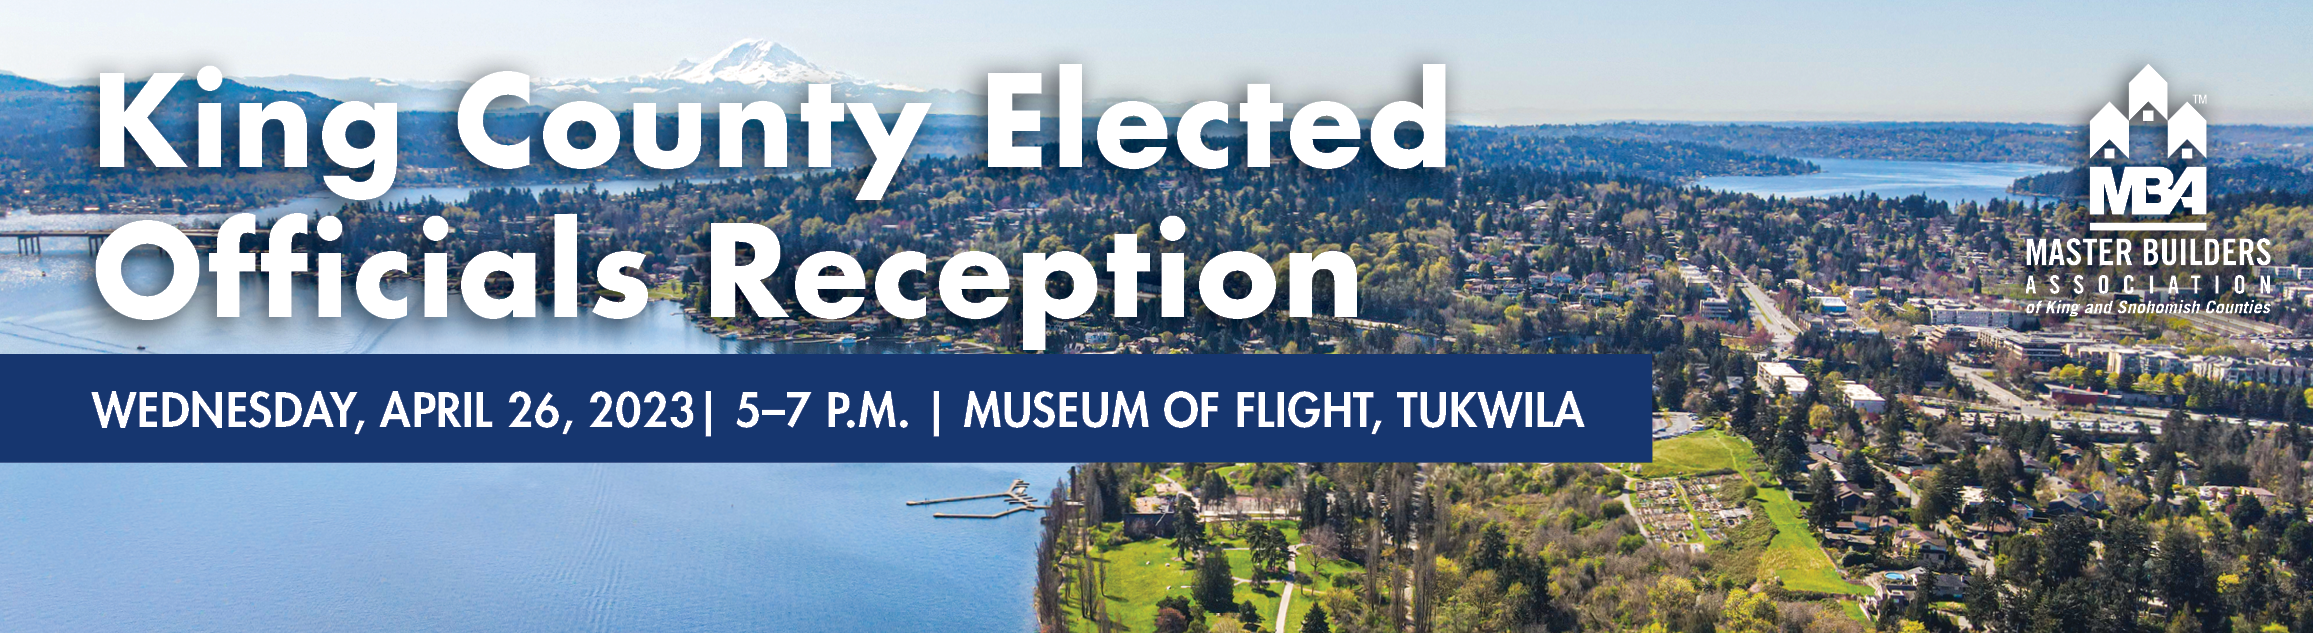 King County Elected Officials Reception